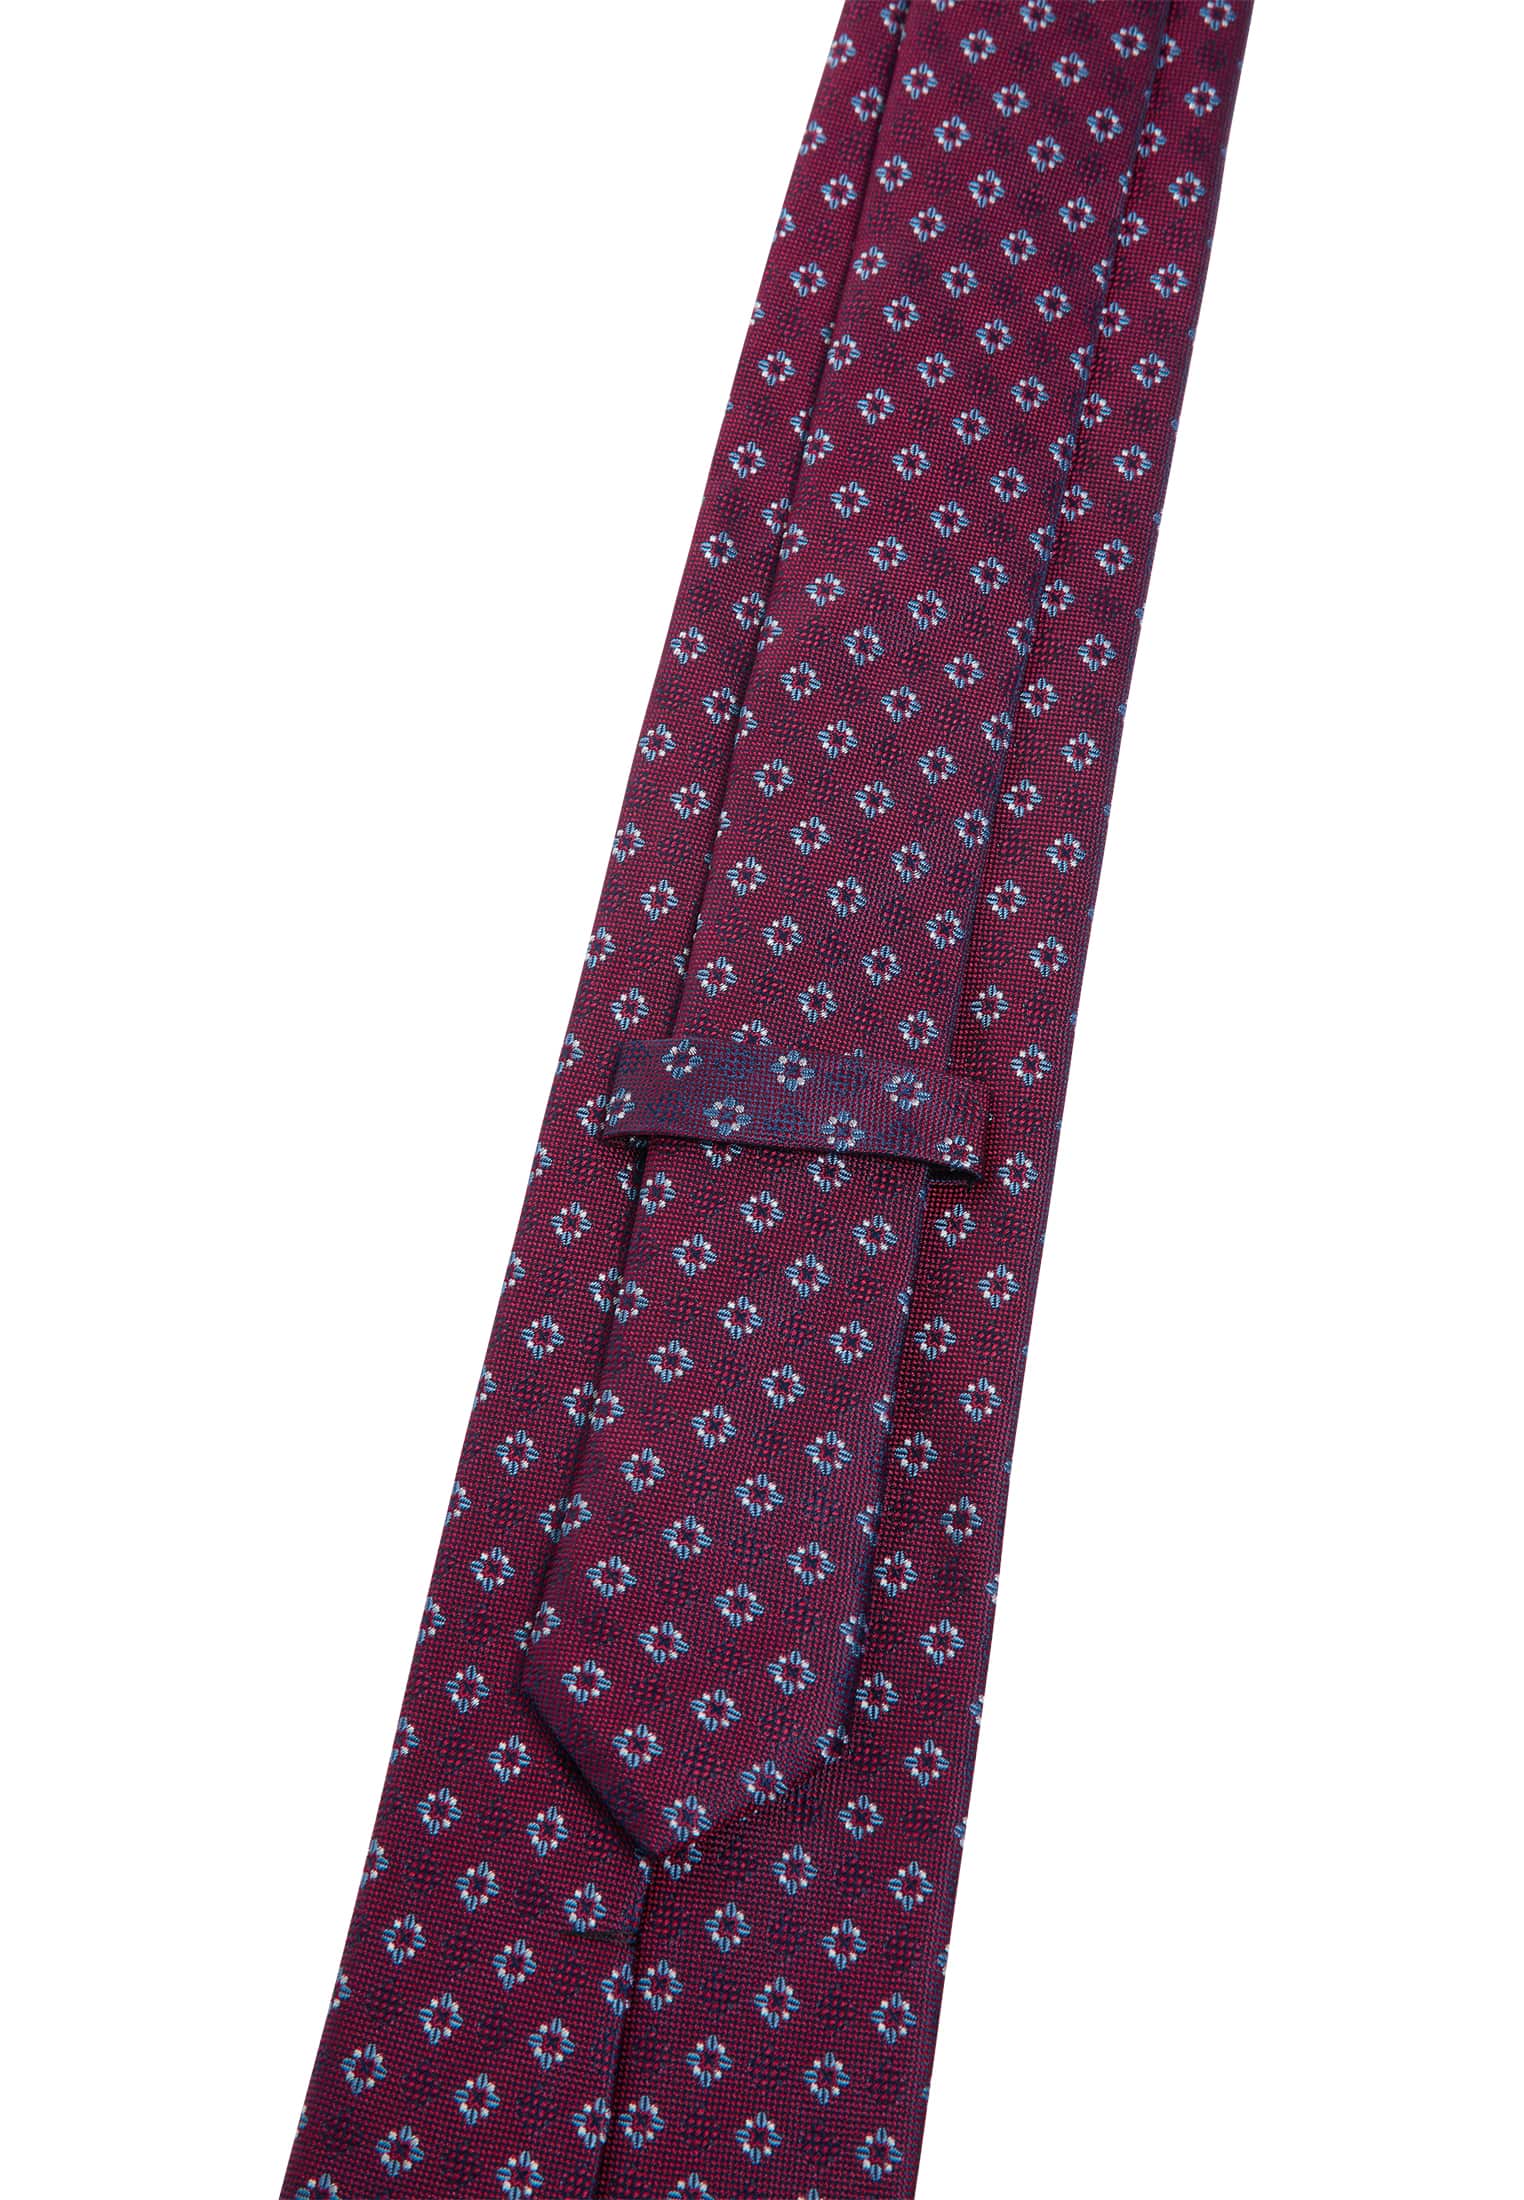 Tie in berry patterned